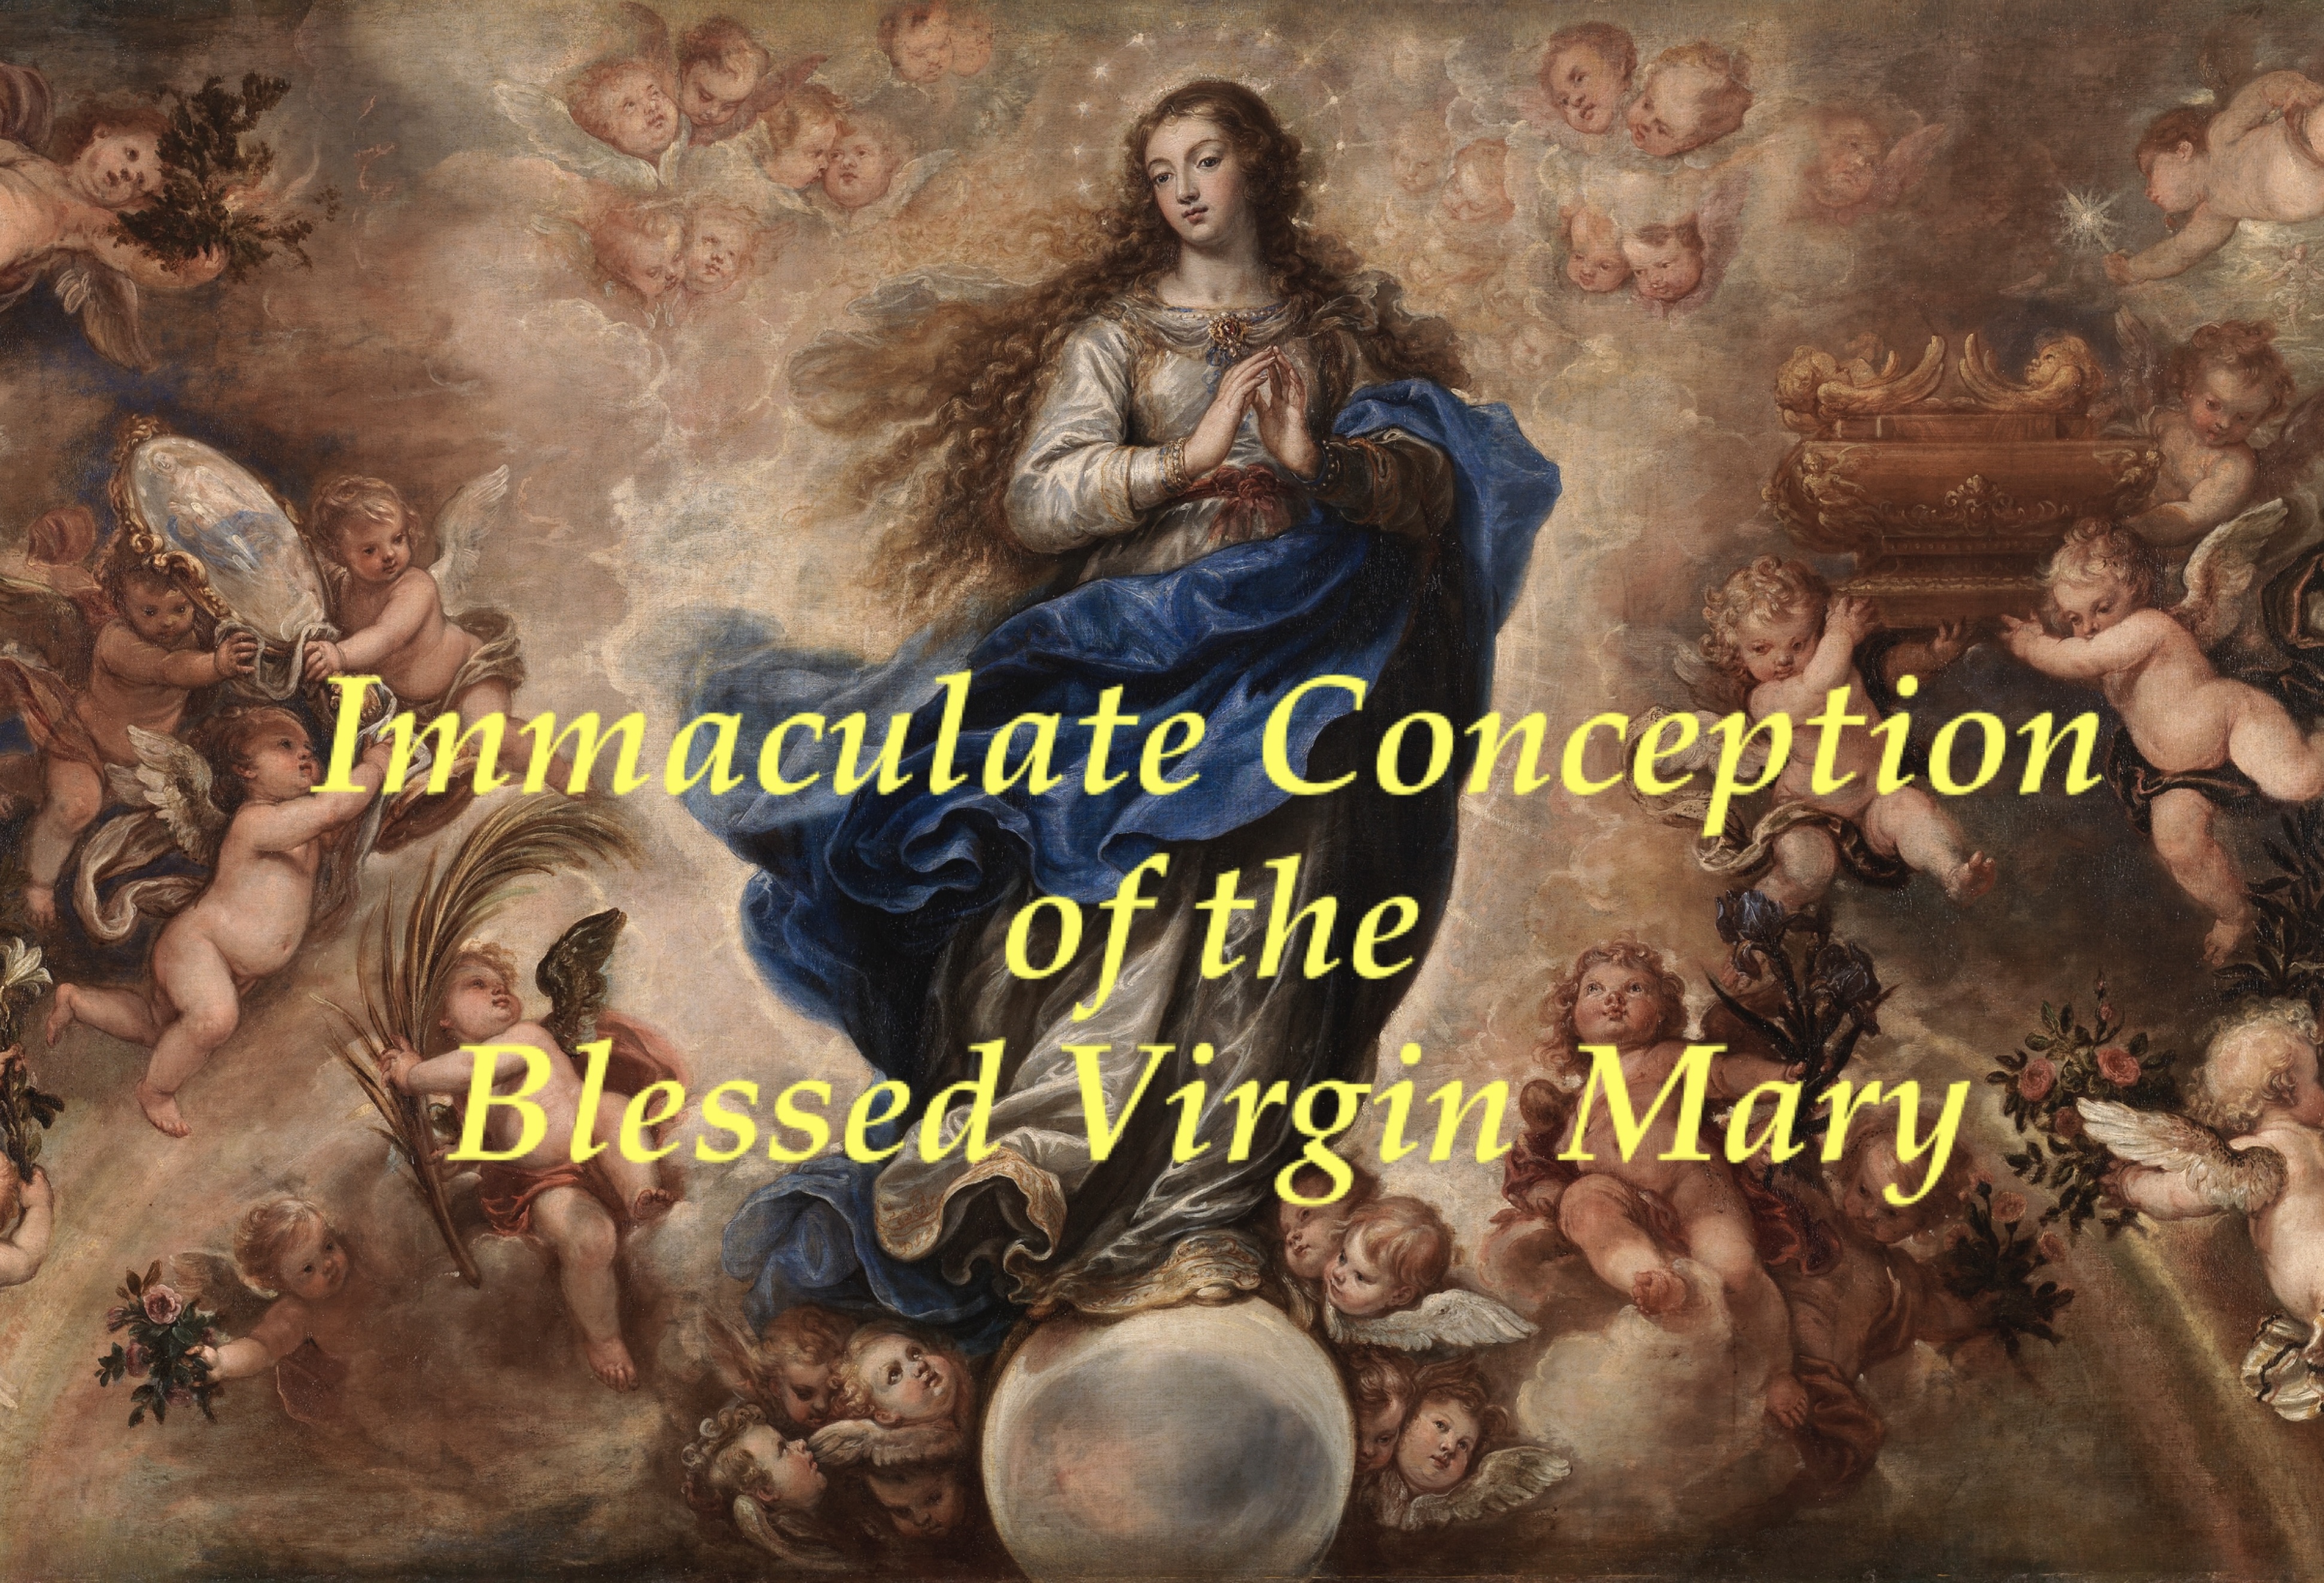 8th December - Immaculate Conception of the Blessed Virgin Mary 